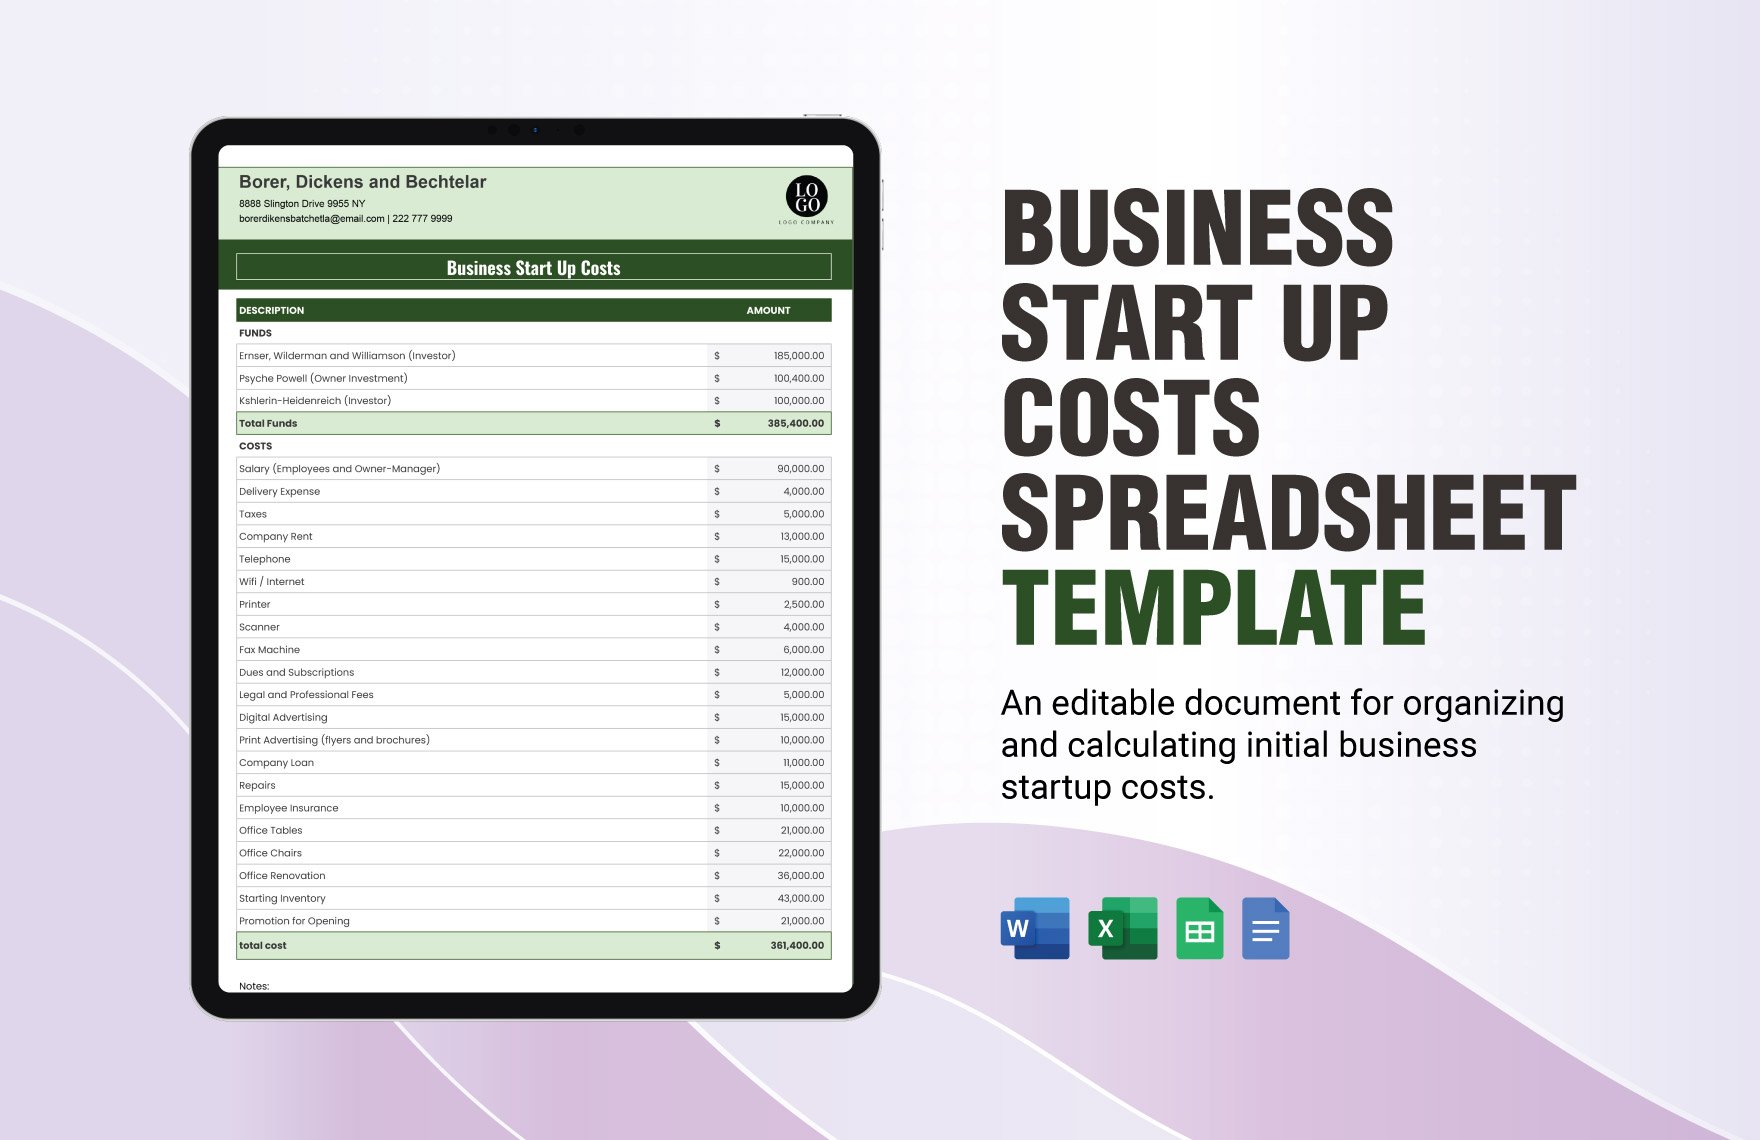 Business Start Up Costs Spreadsheet Template in Word, Google Docs, Excel, Google Sheets